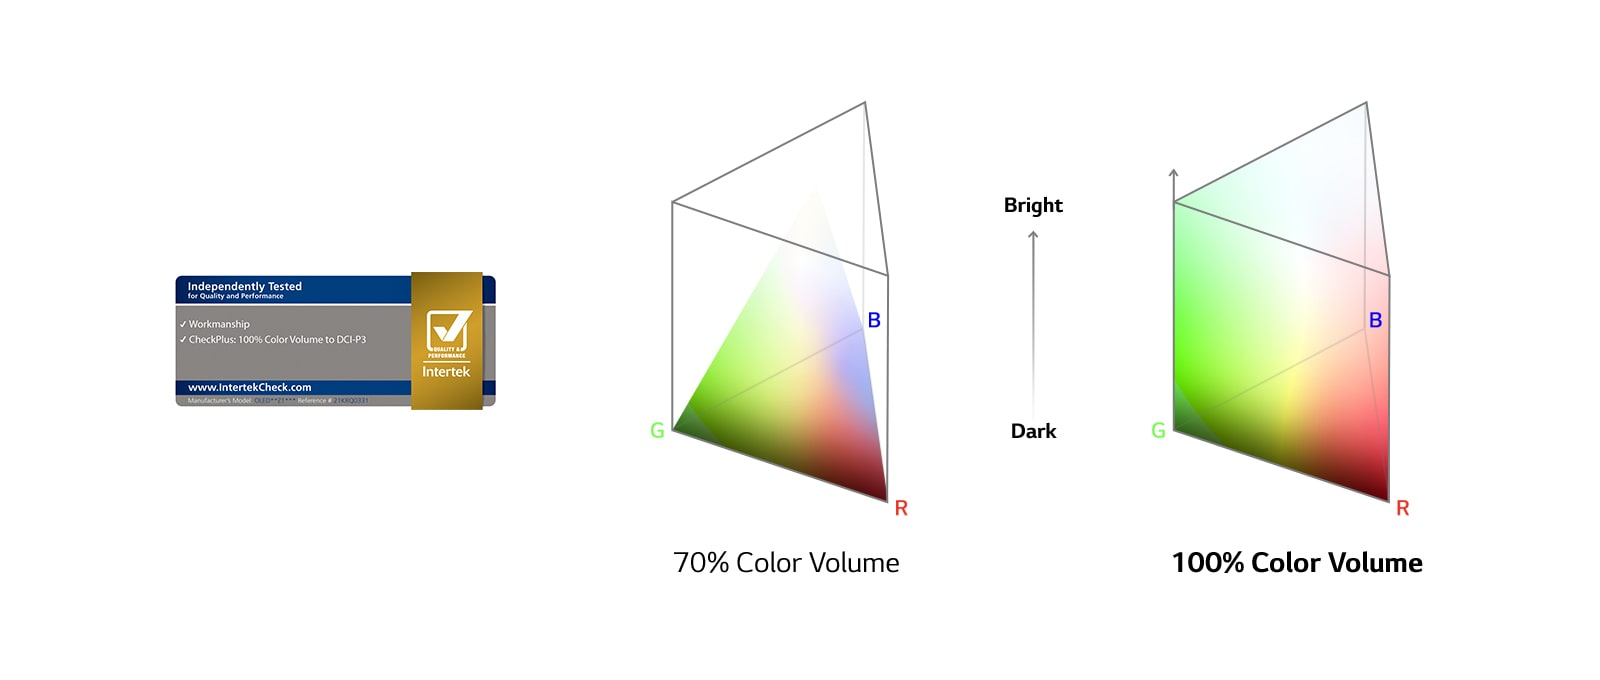 A 100% Color Volume logo certified by Intertek. A comparison graph between 70% Color Volume and 100% Color Volume.